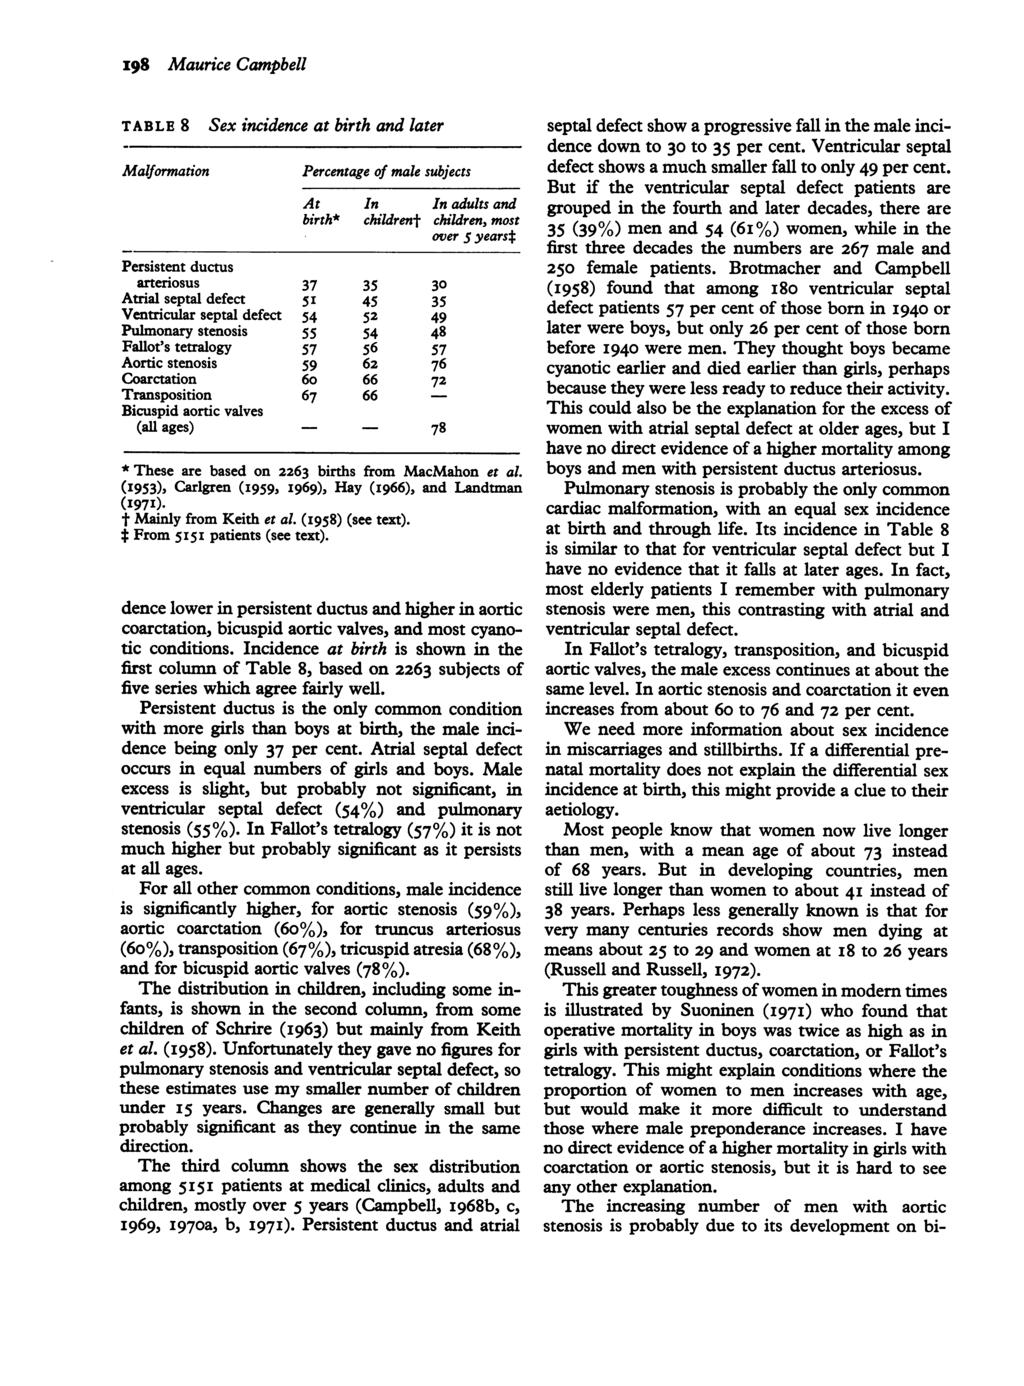 198 Maurice Campbell TABLE 8 Malformation Sex incidence at birth and later Percentage of male subjects At In In adults and birth* childrent children, most over 5 years* Persistent ductus arteriosus